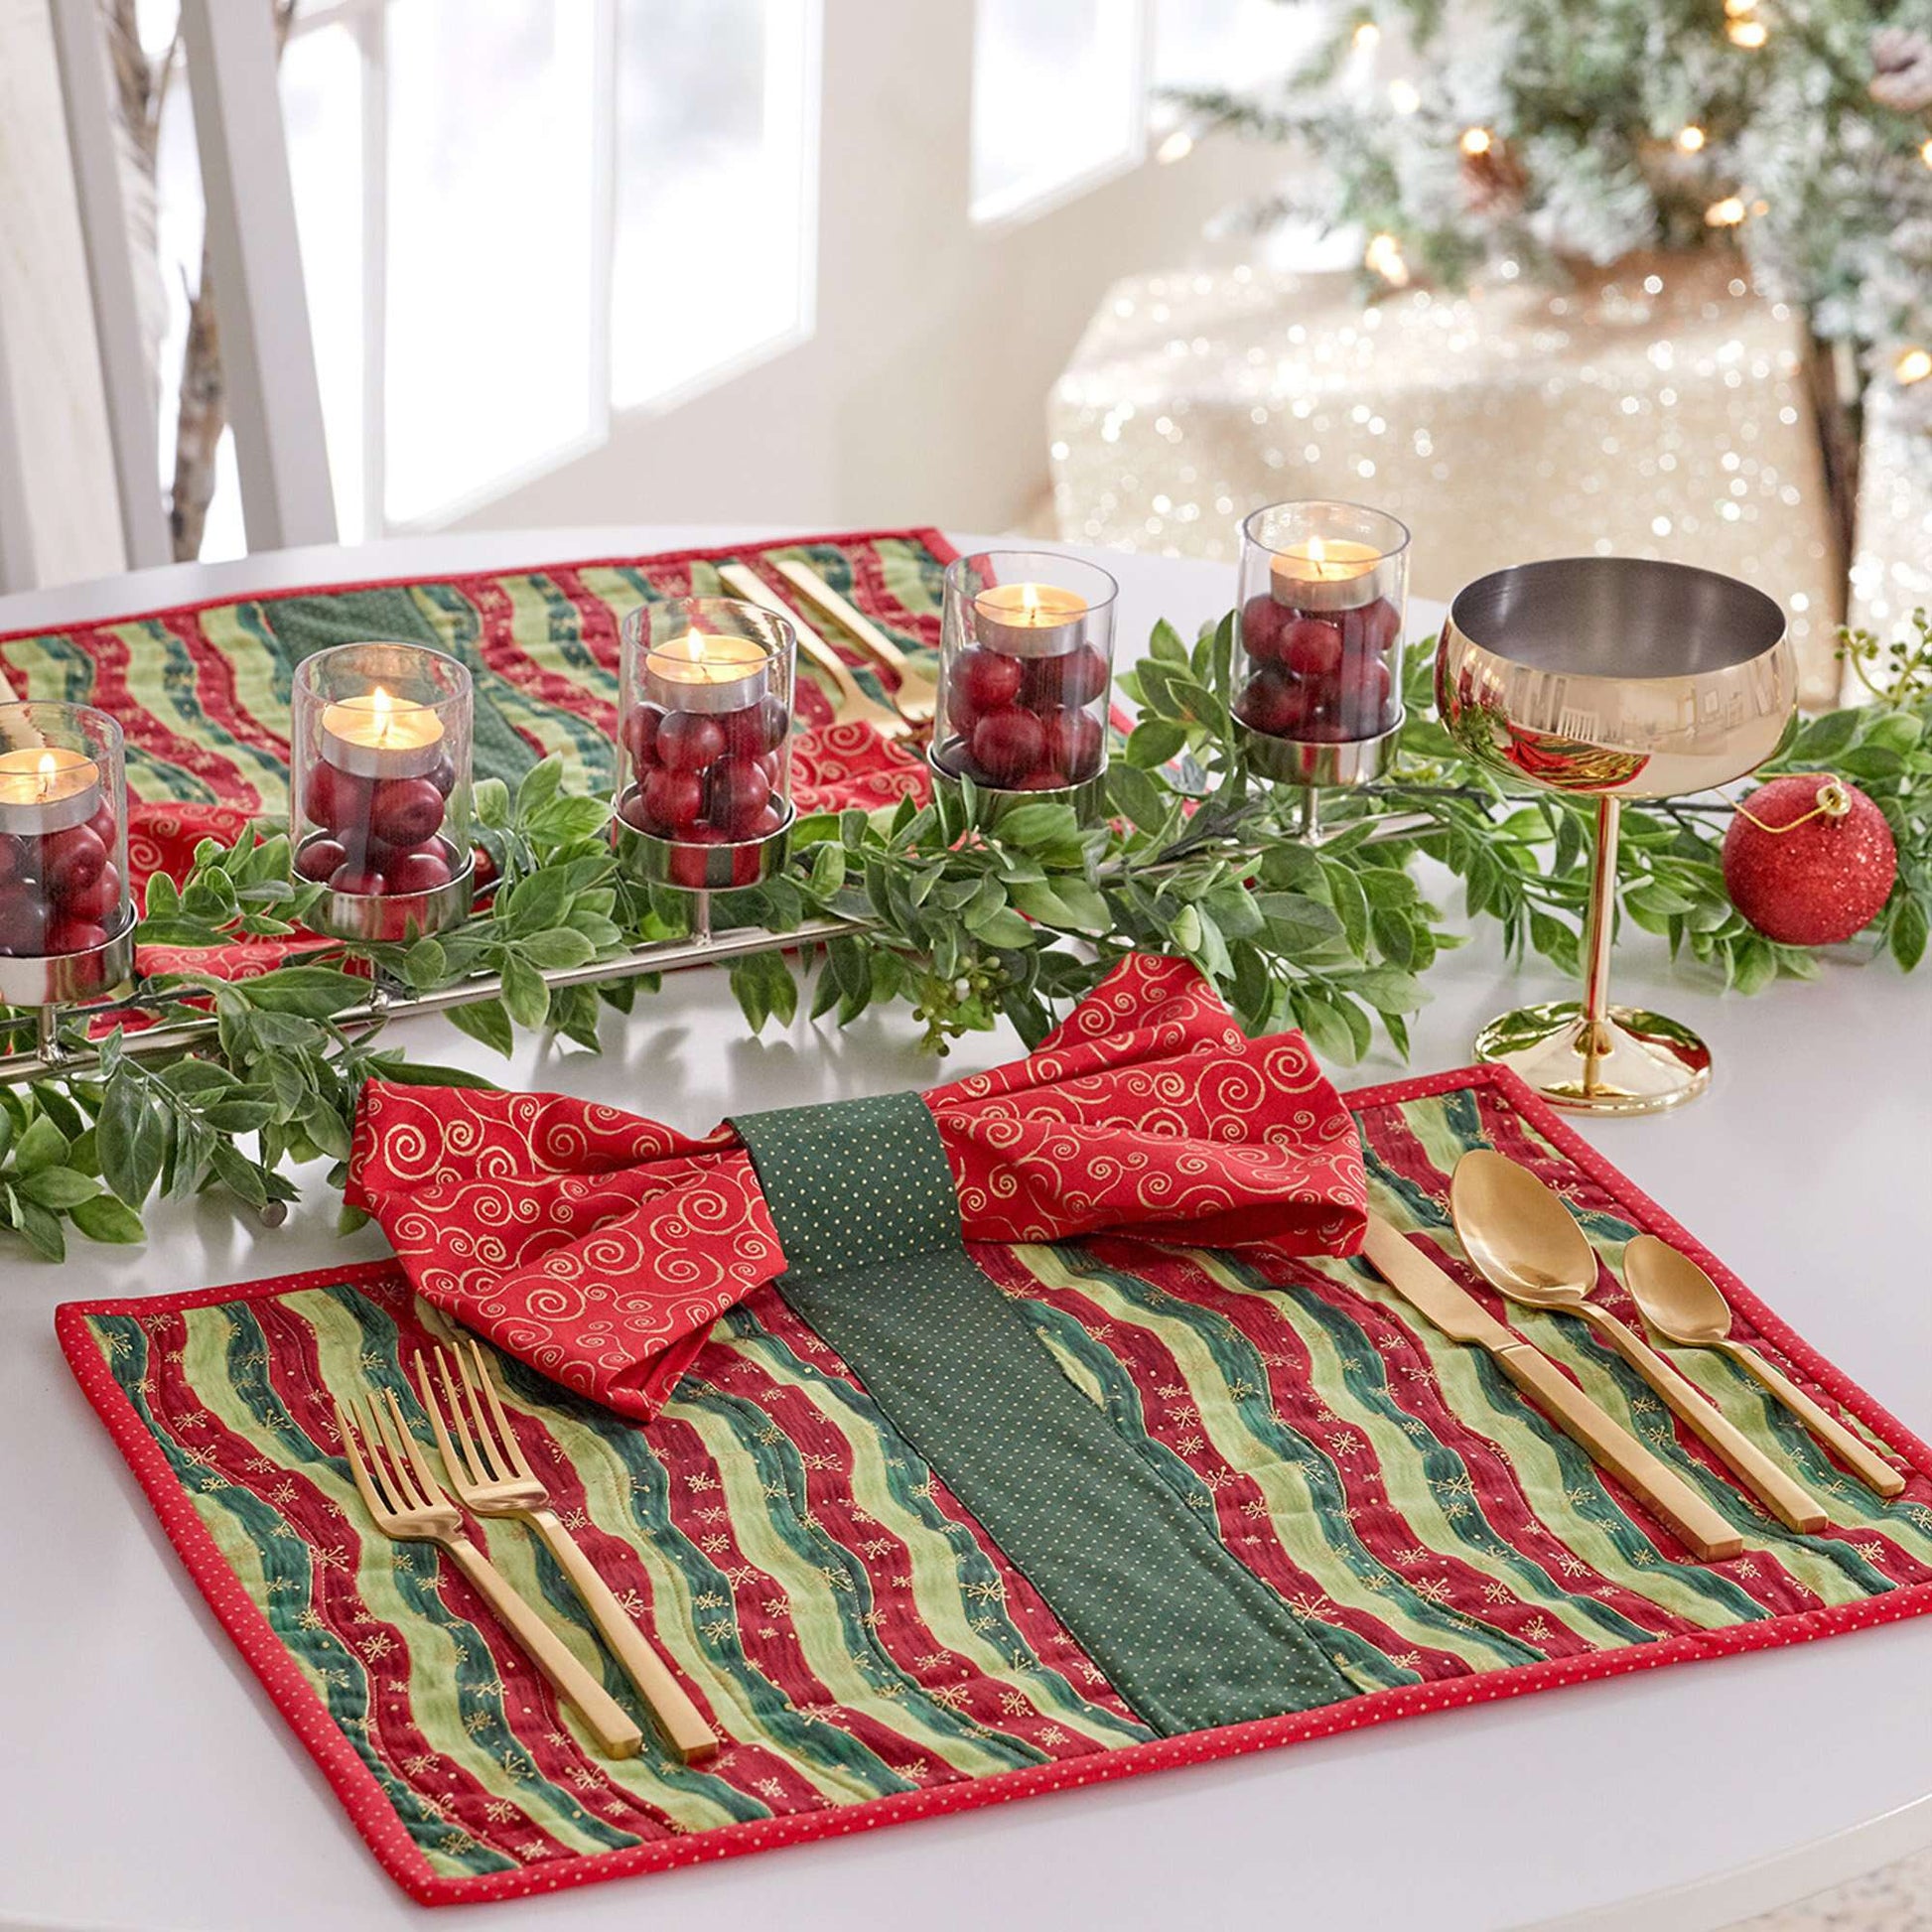 Free Coats & Clark Sewing Bow Tie Quilted Placemats Sparkle With Metallic Thread Pattern